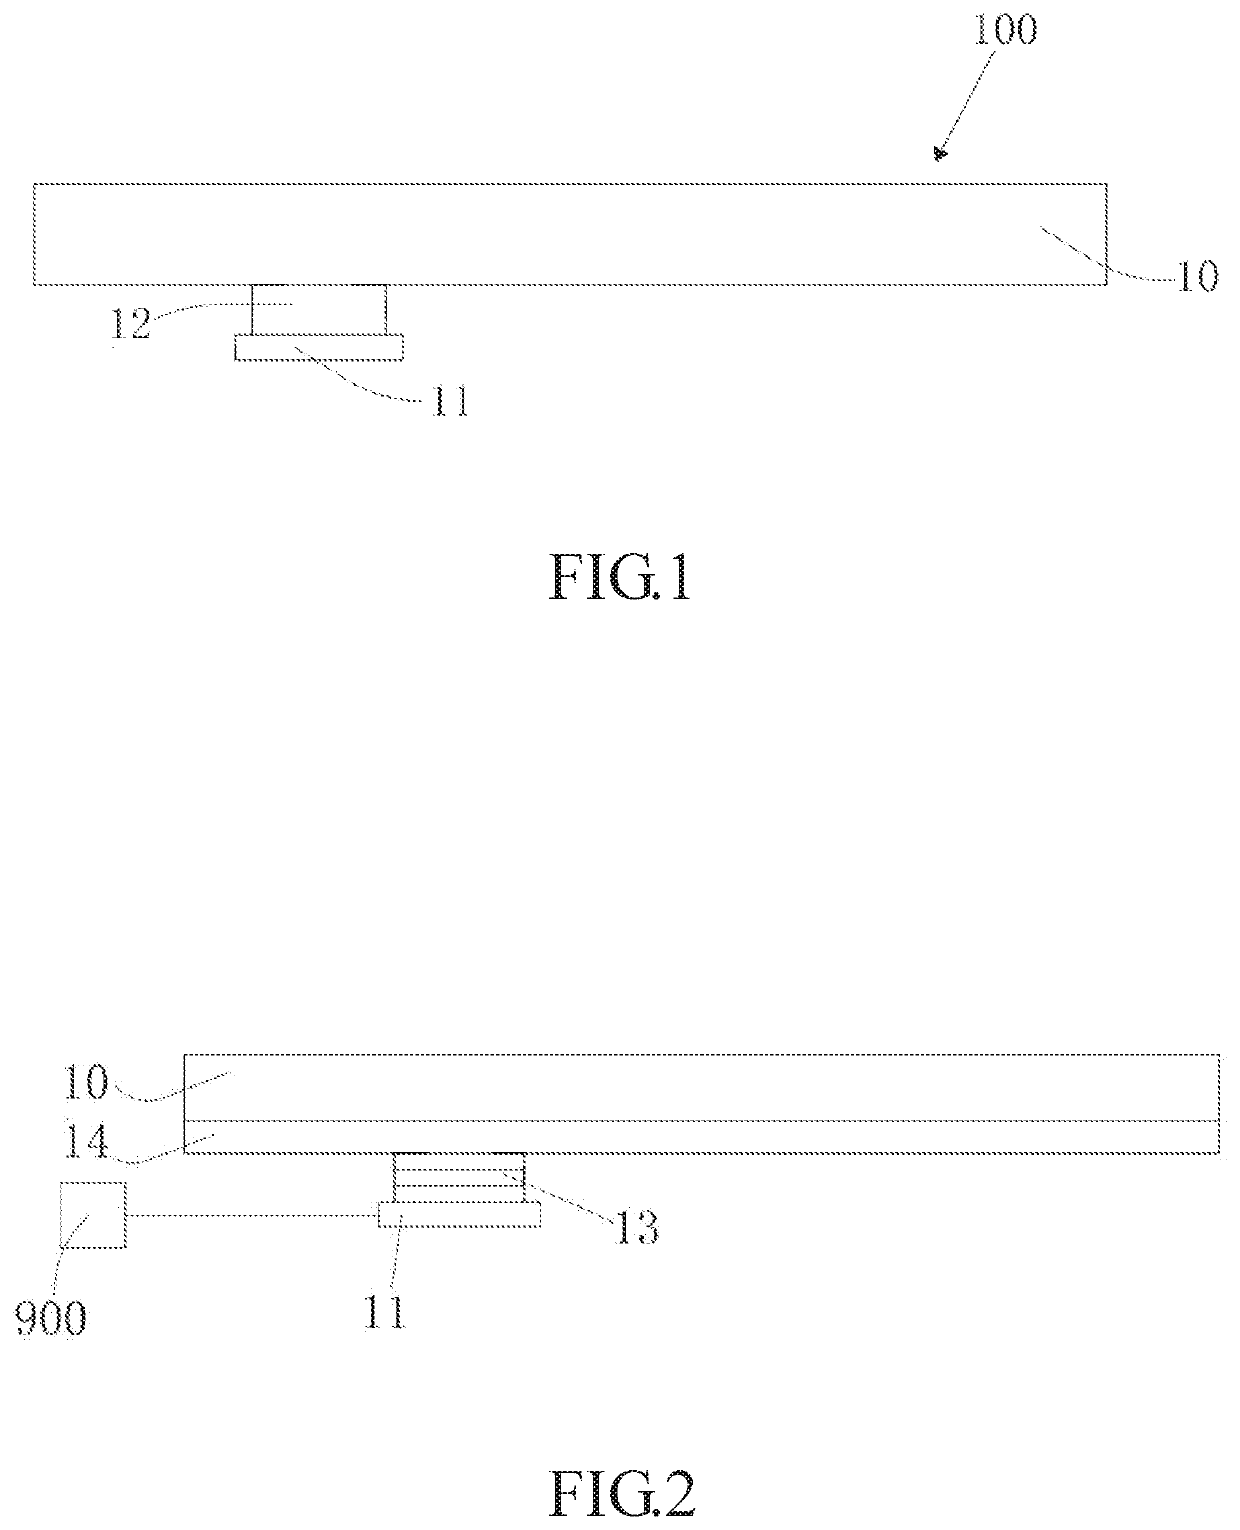 Display device with automatic brightness adjustment